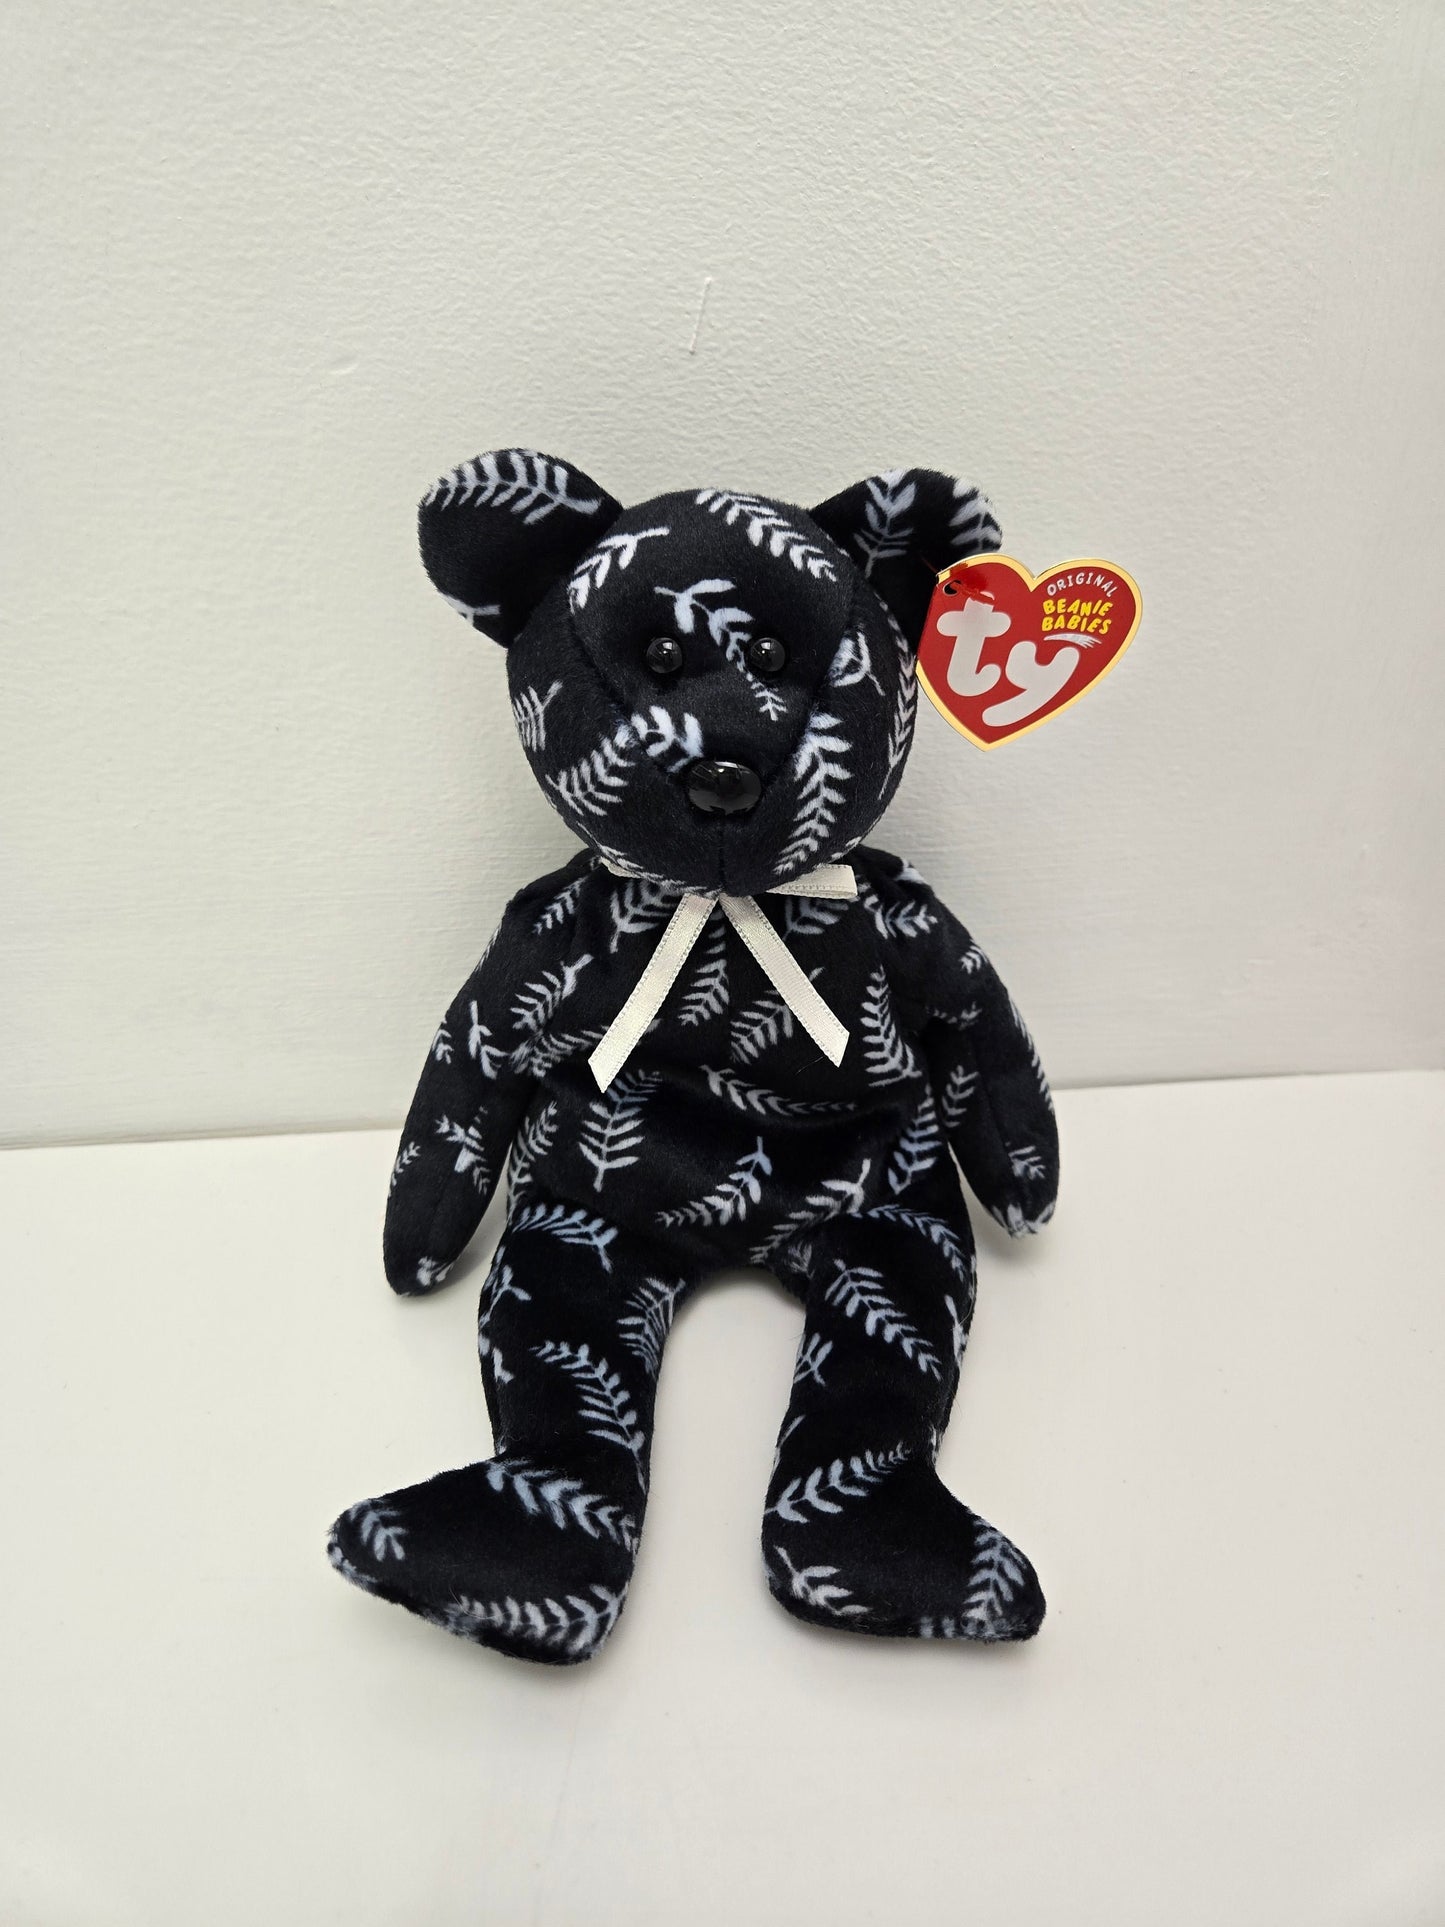 Ty Beanie Baby “Silver” the Asia Pacific Bear (8.5 inch)